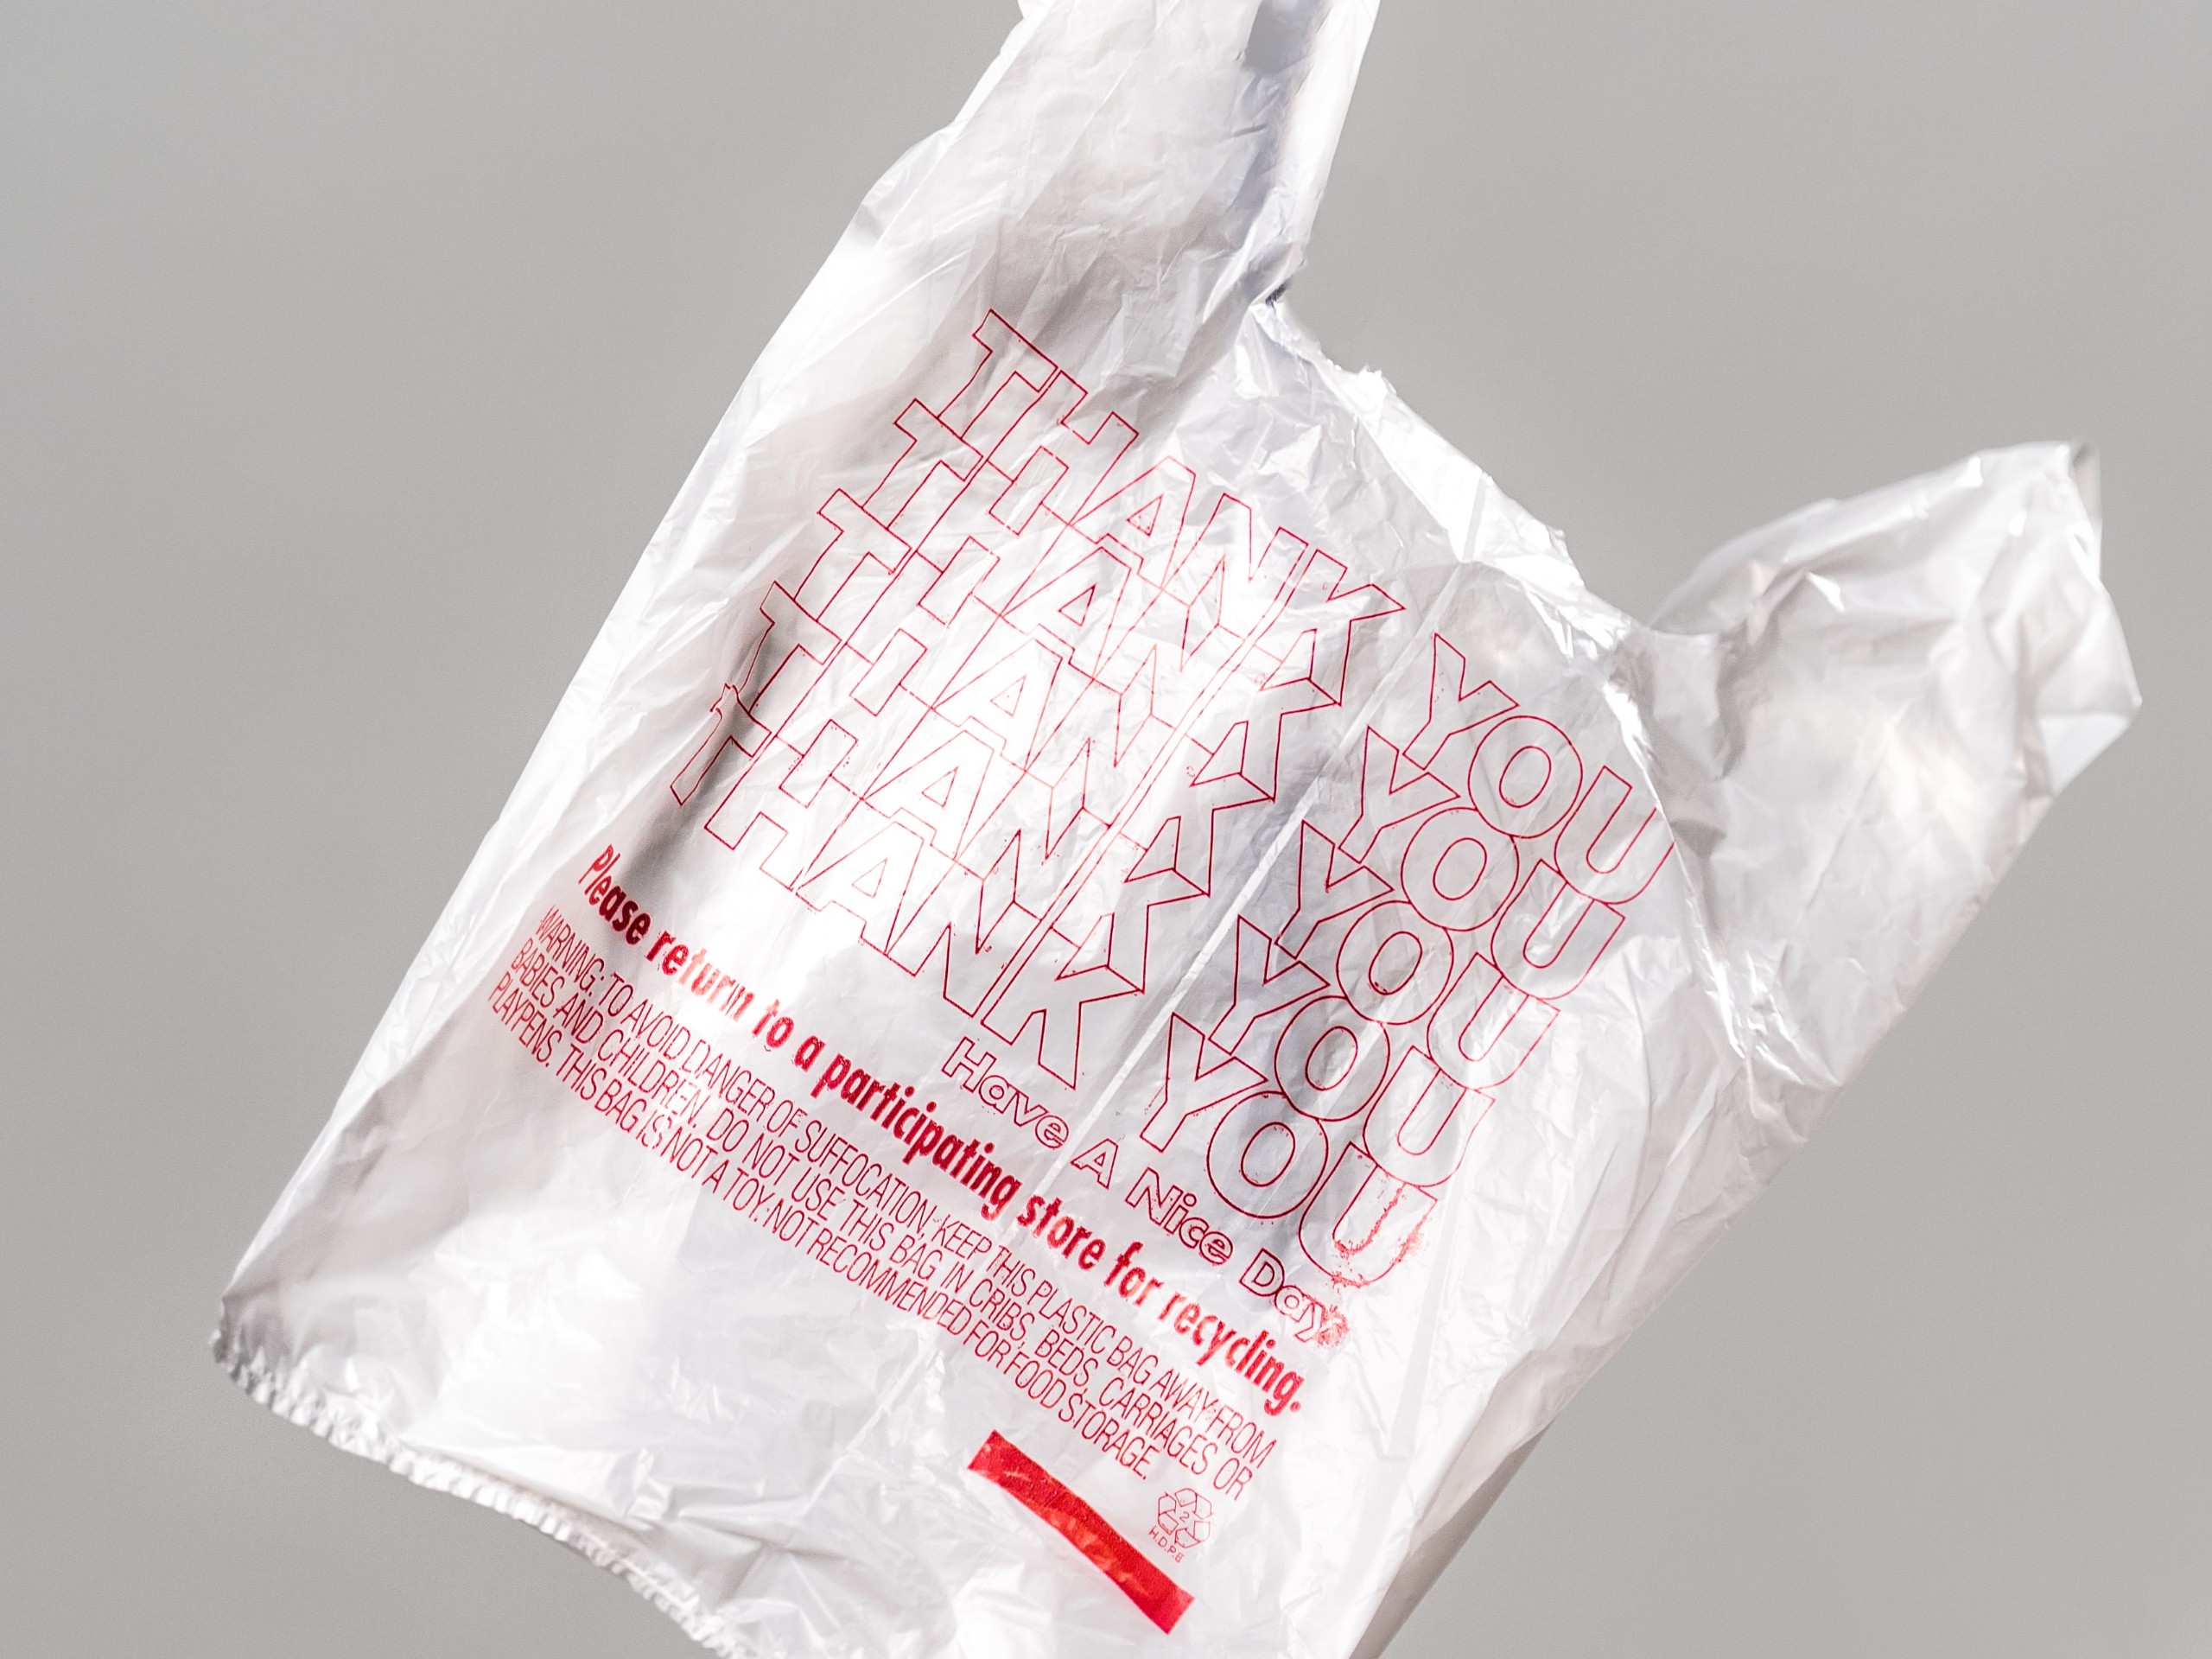 Reusable grocery bags as environmentally friendly as you might think